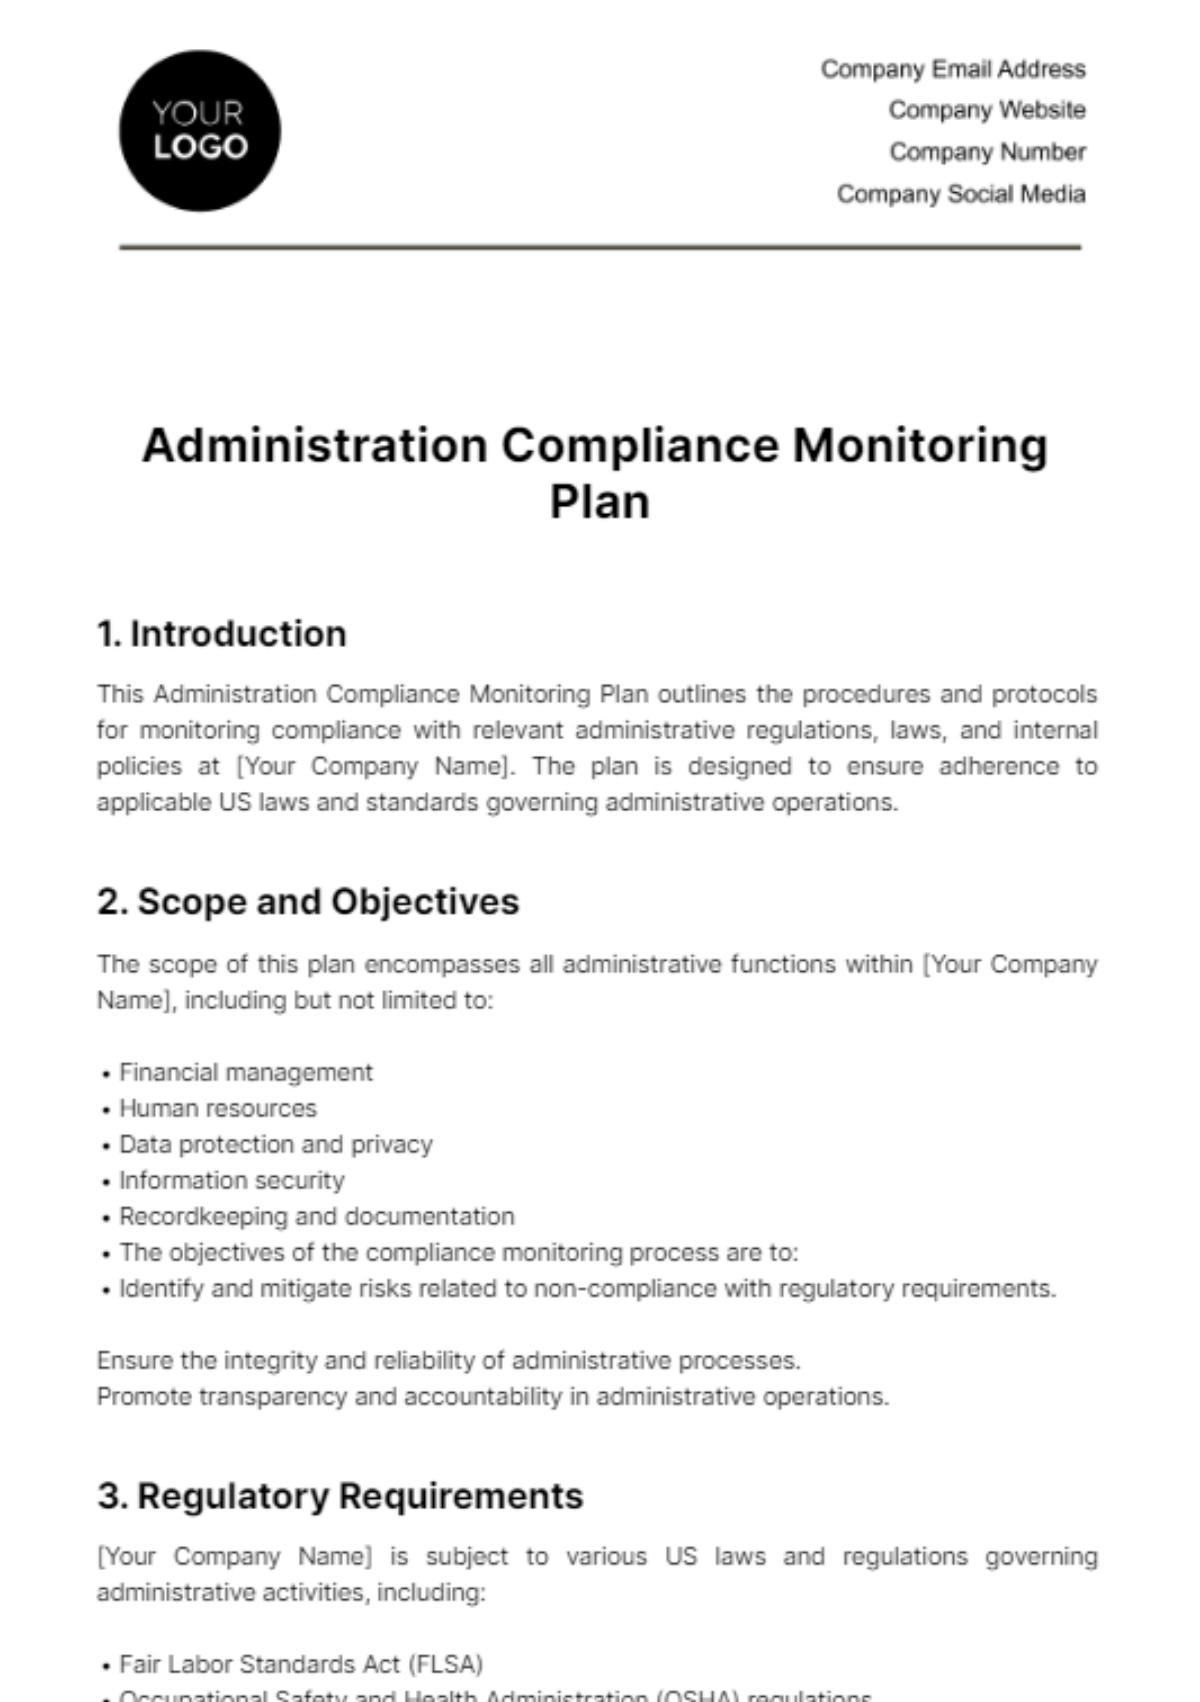 Administration Compliance Monitoring Plan Template